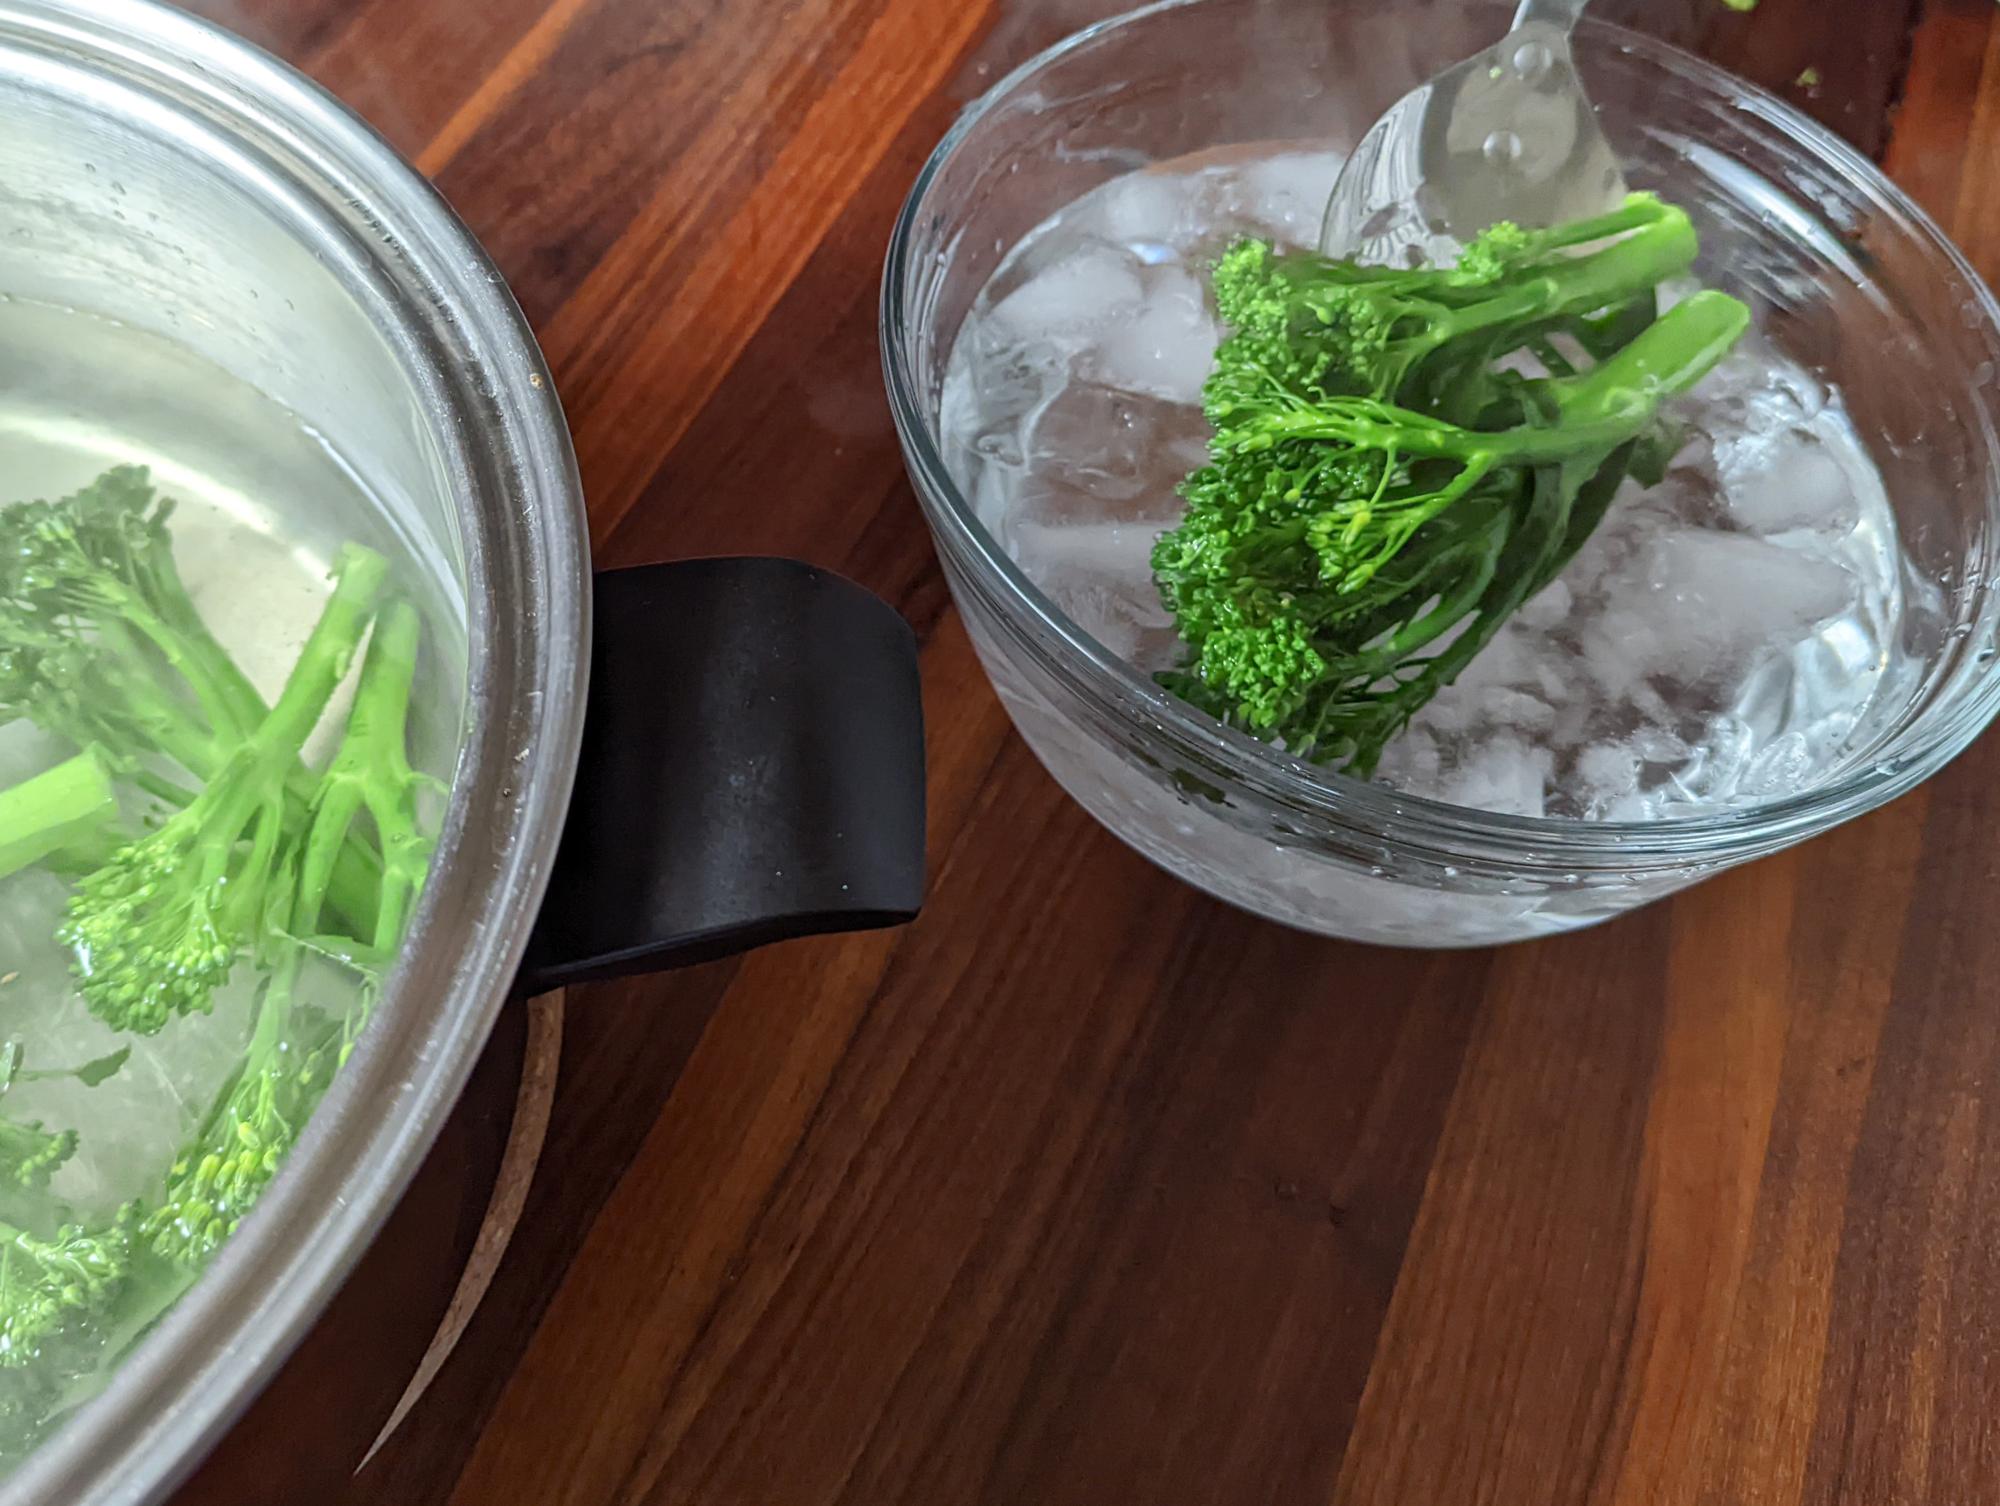 Blanching the broccolini.